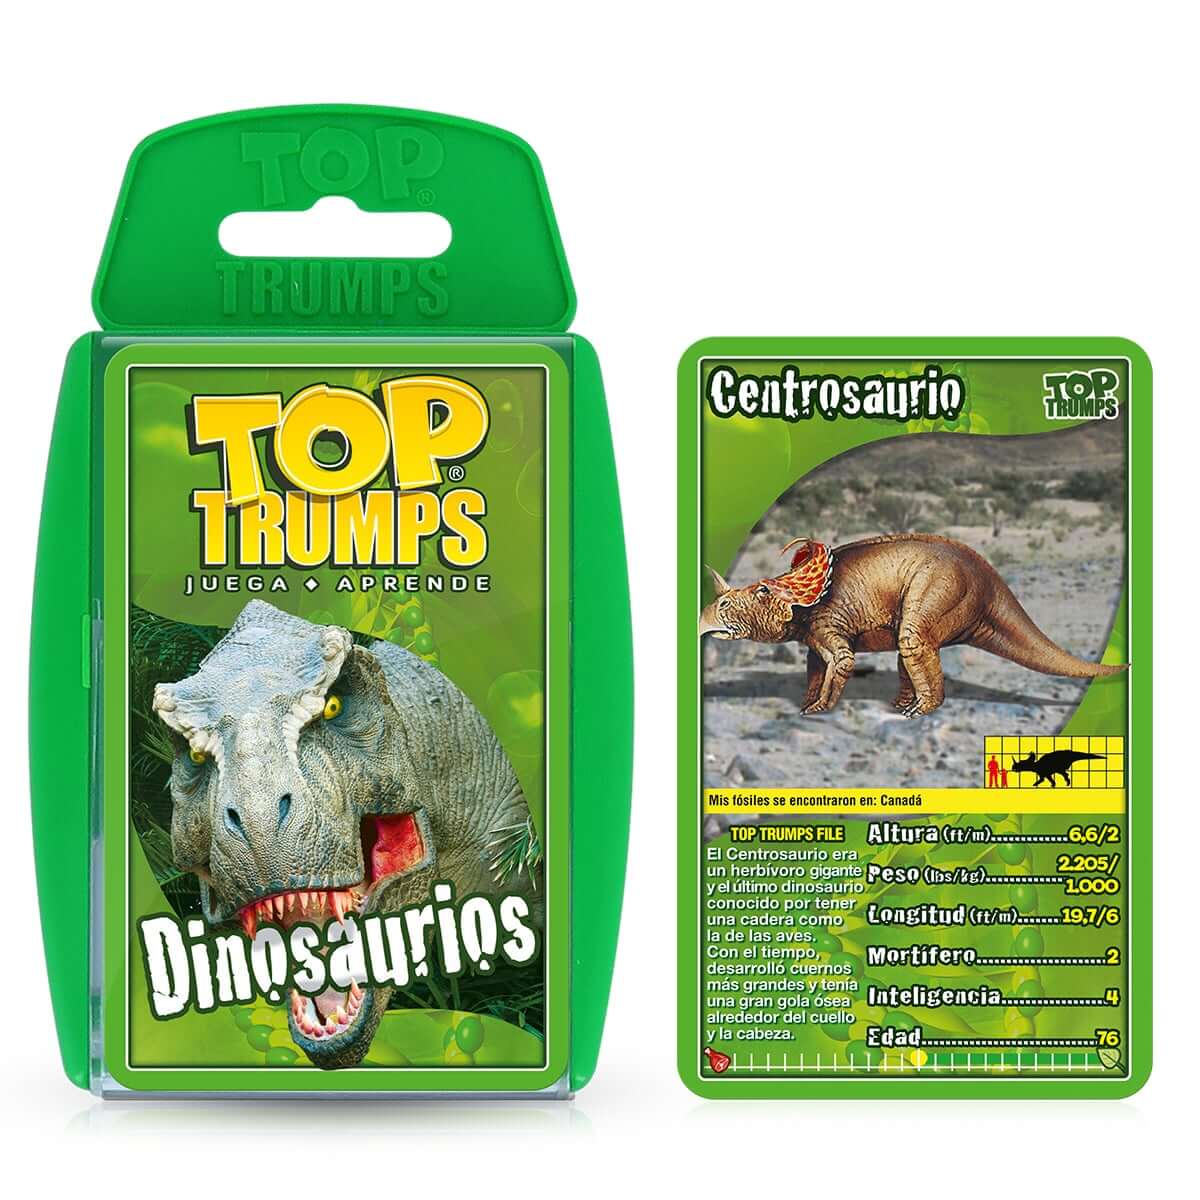 Around the World in 120 Top Trumps Card Game Bundle